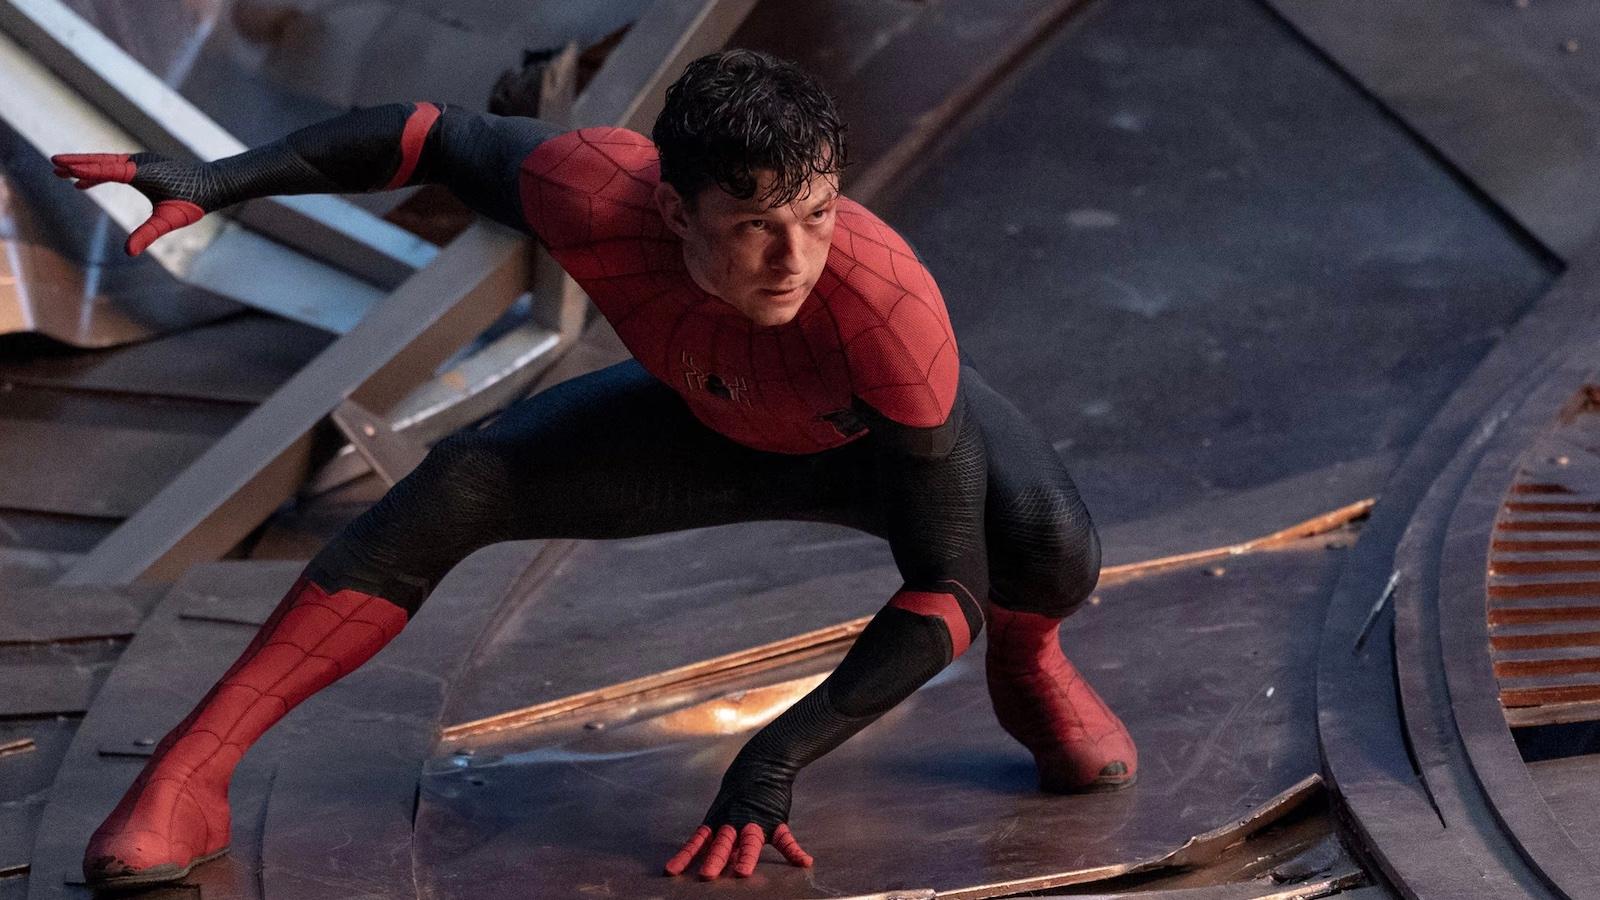 Spider-Man: Far From Home' Is Taking Us Into the Multiverse—and